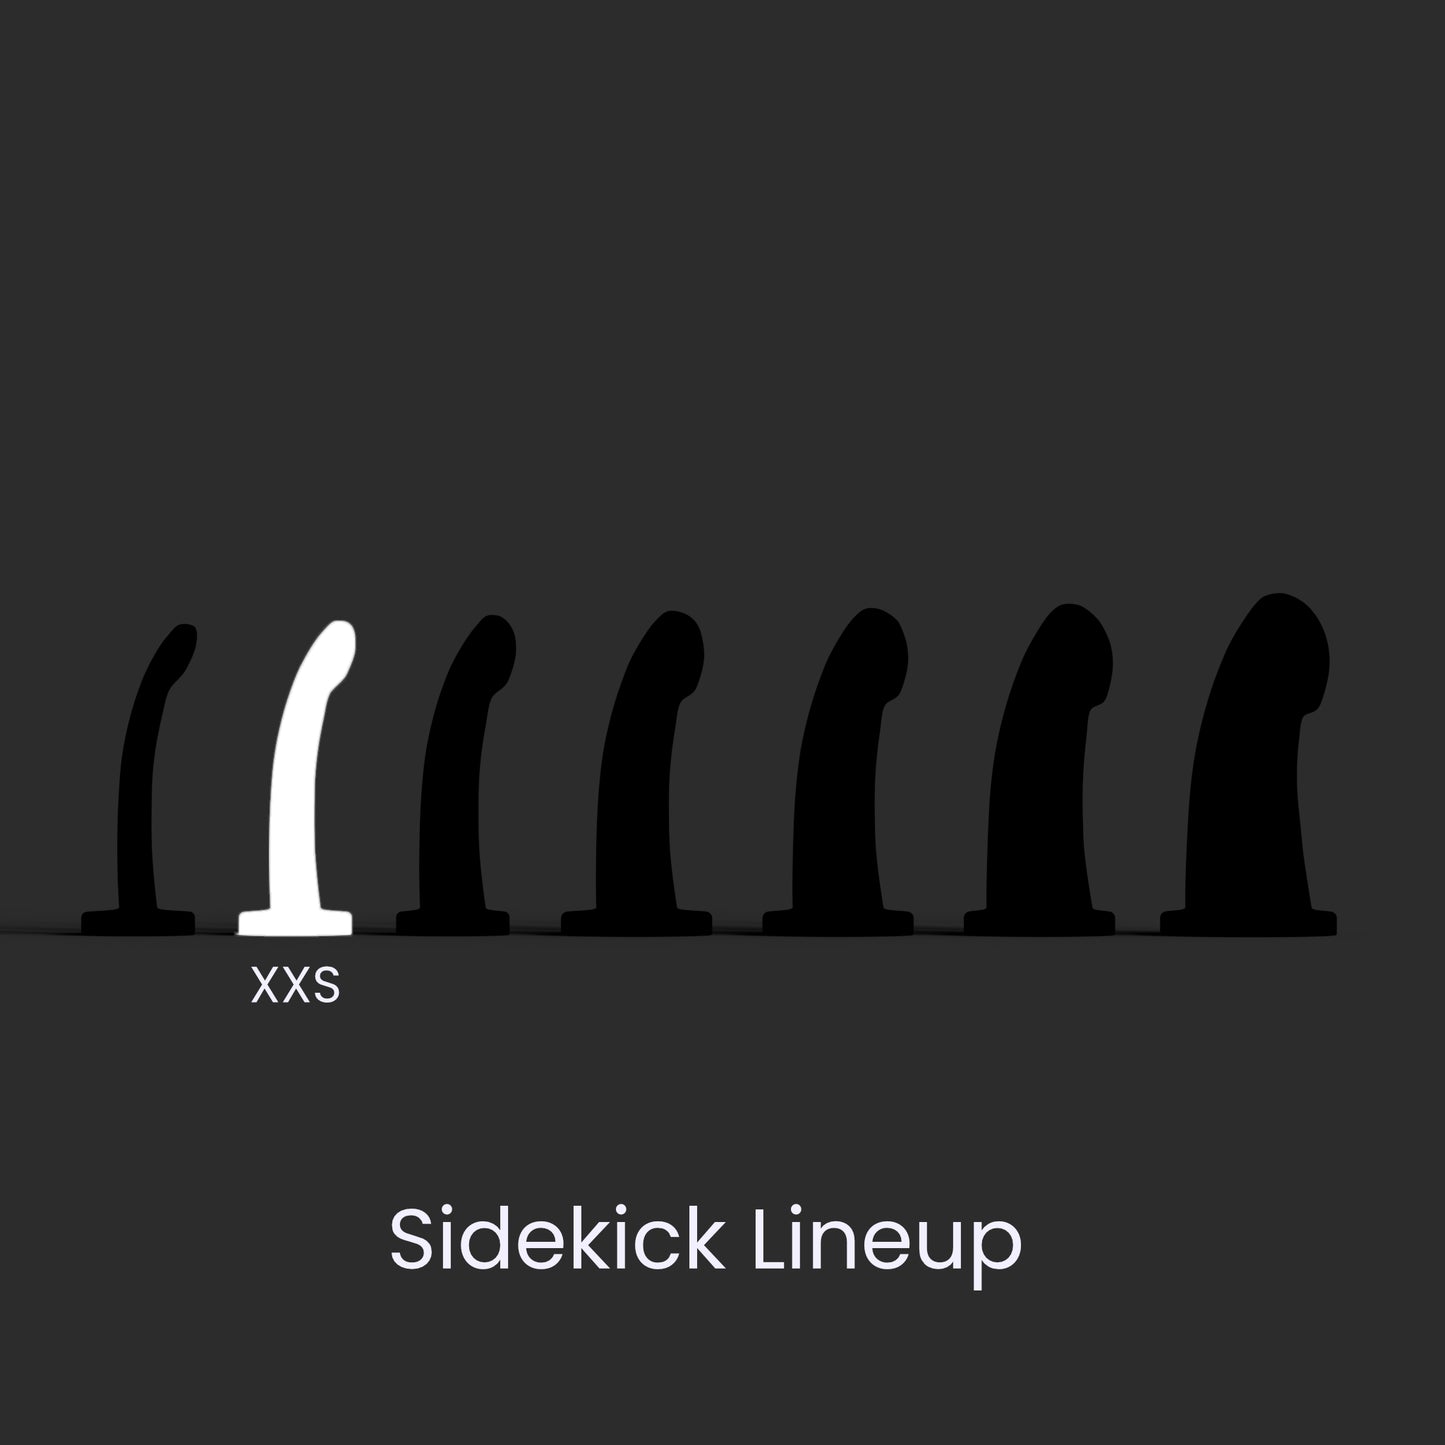 Diagram showing the seven Sidekick models lined up left to right smallest to largest, and the XXS in the second position.